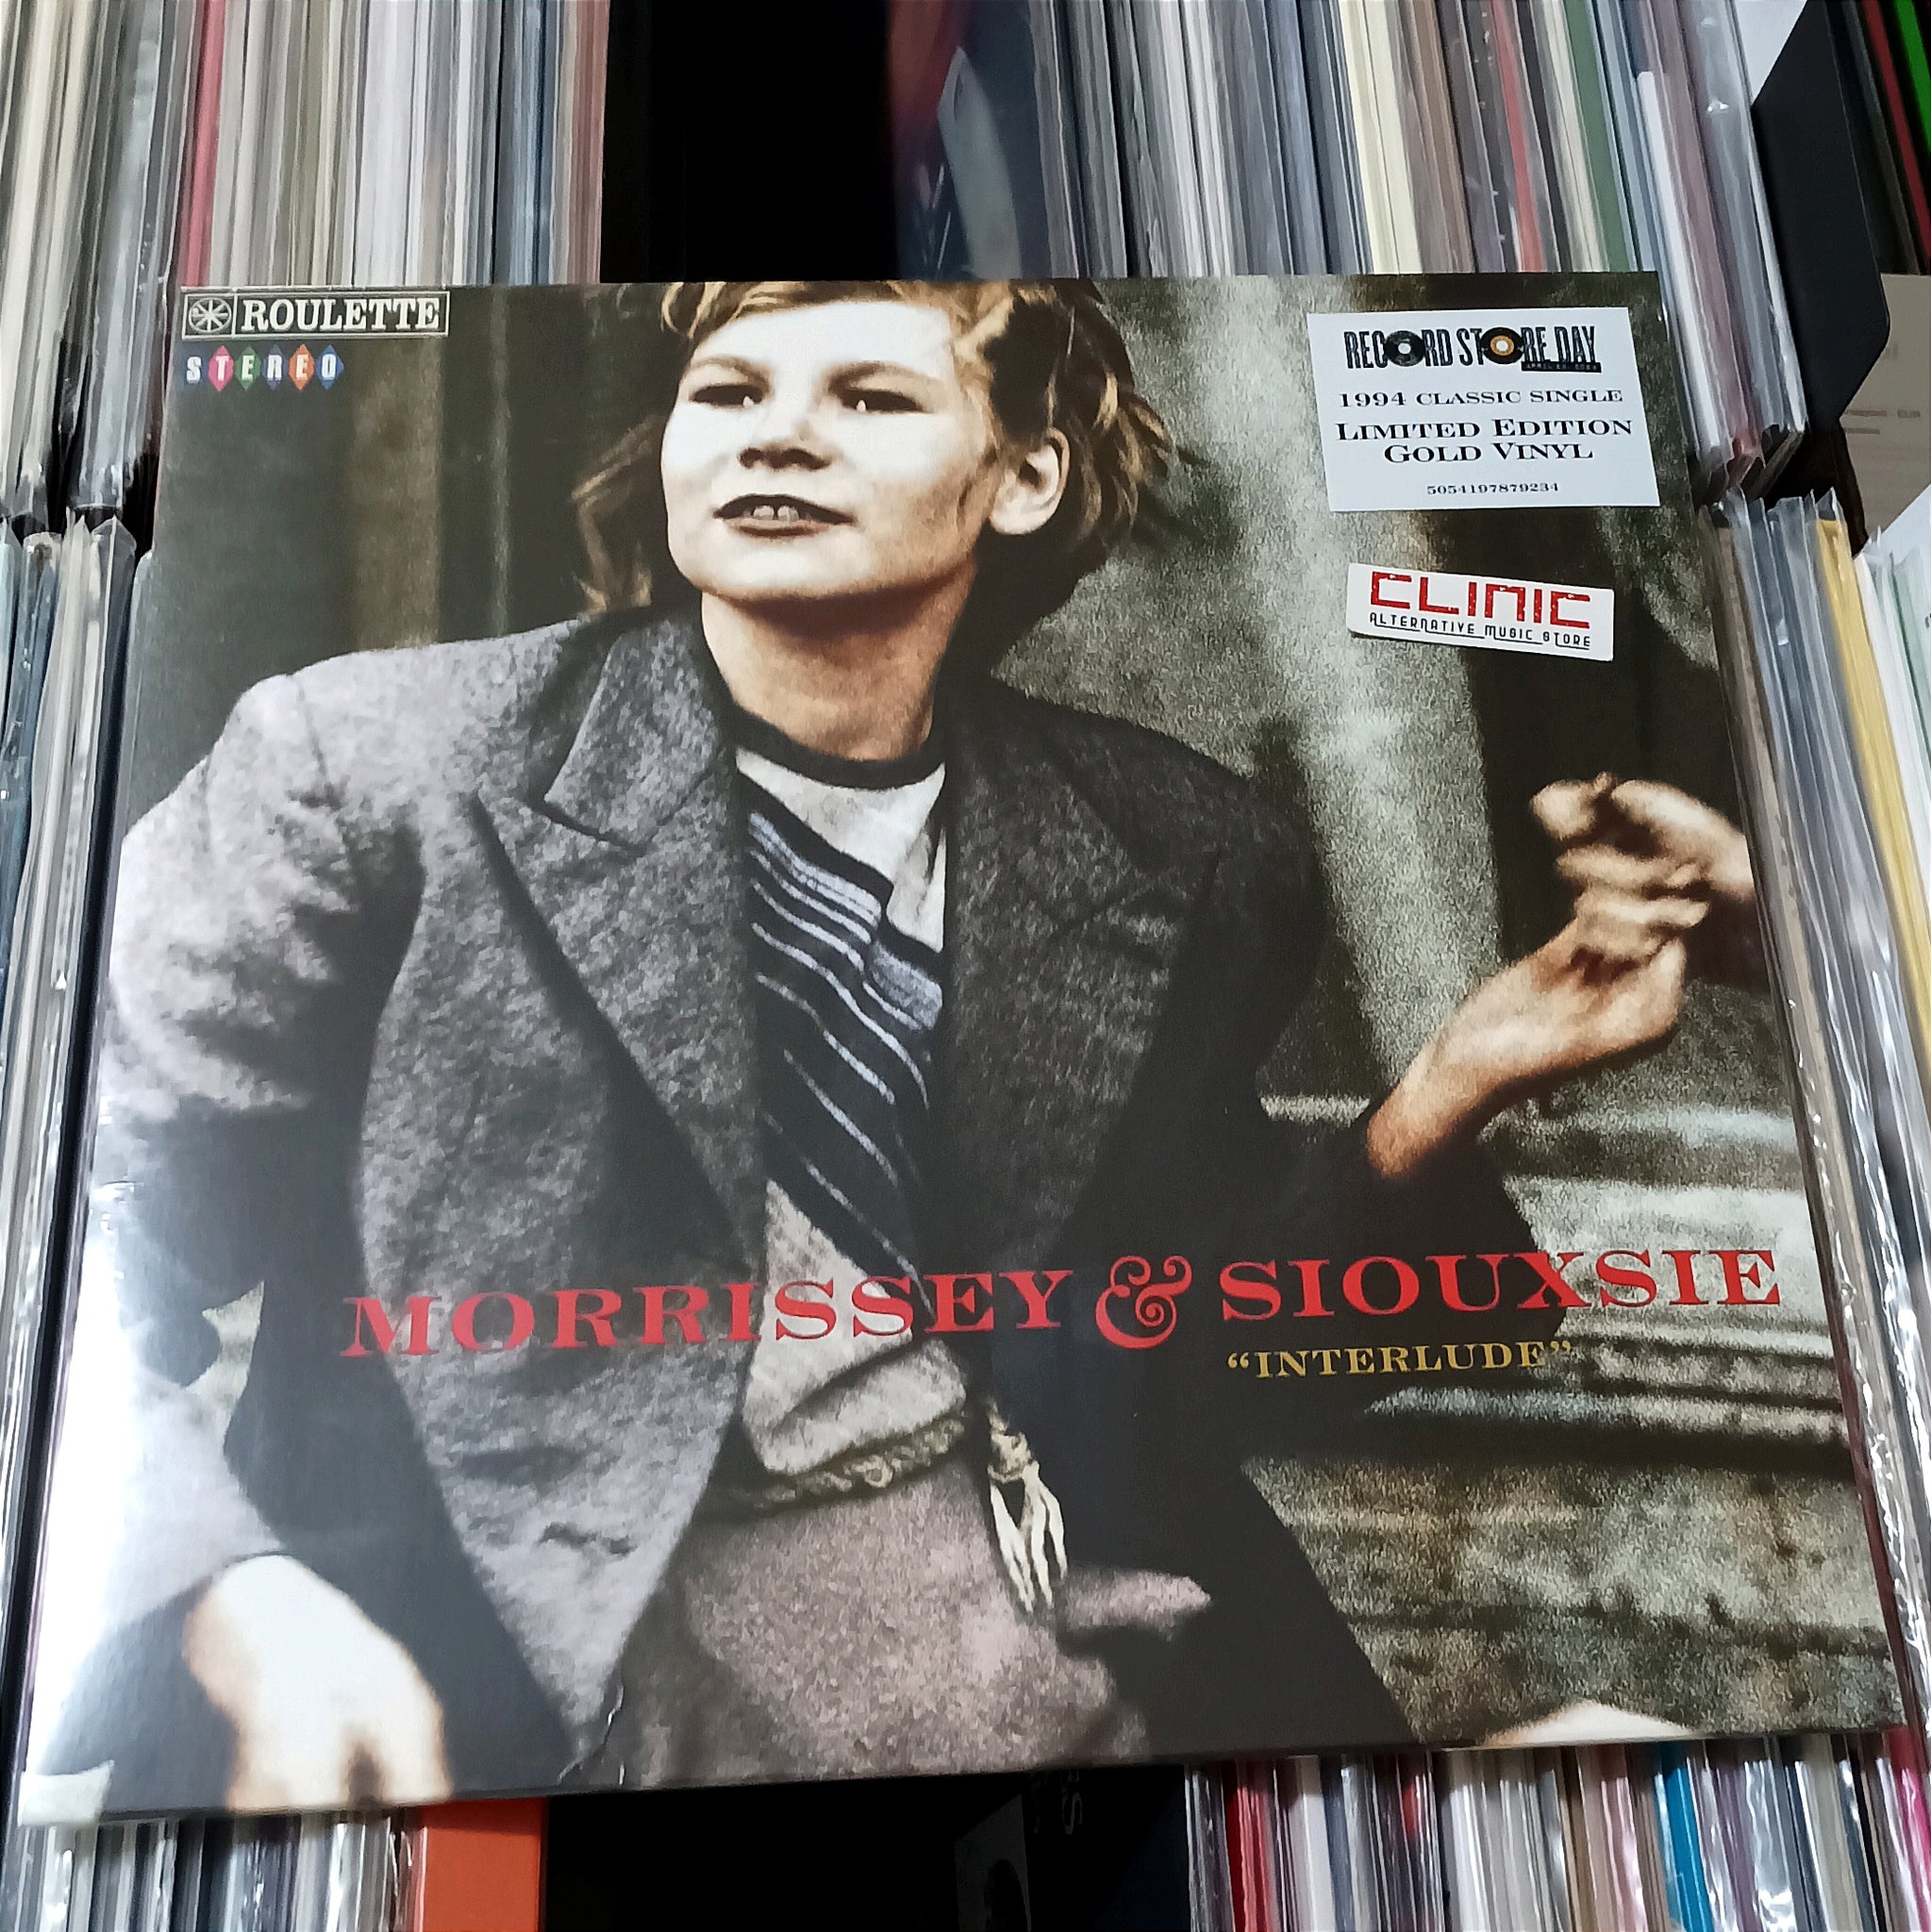 12" - MORRISSEY & SIOUXSIE - INTERLUDE - Record Store Day